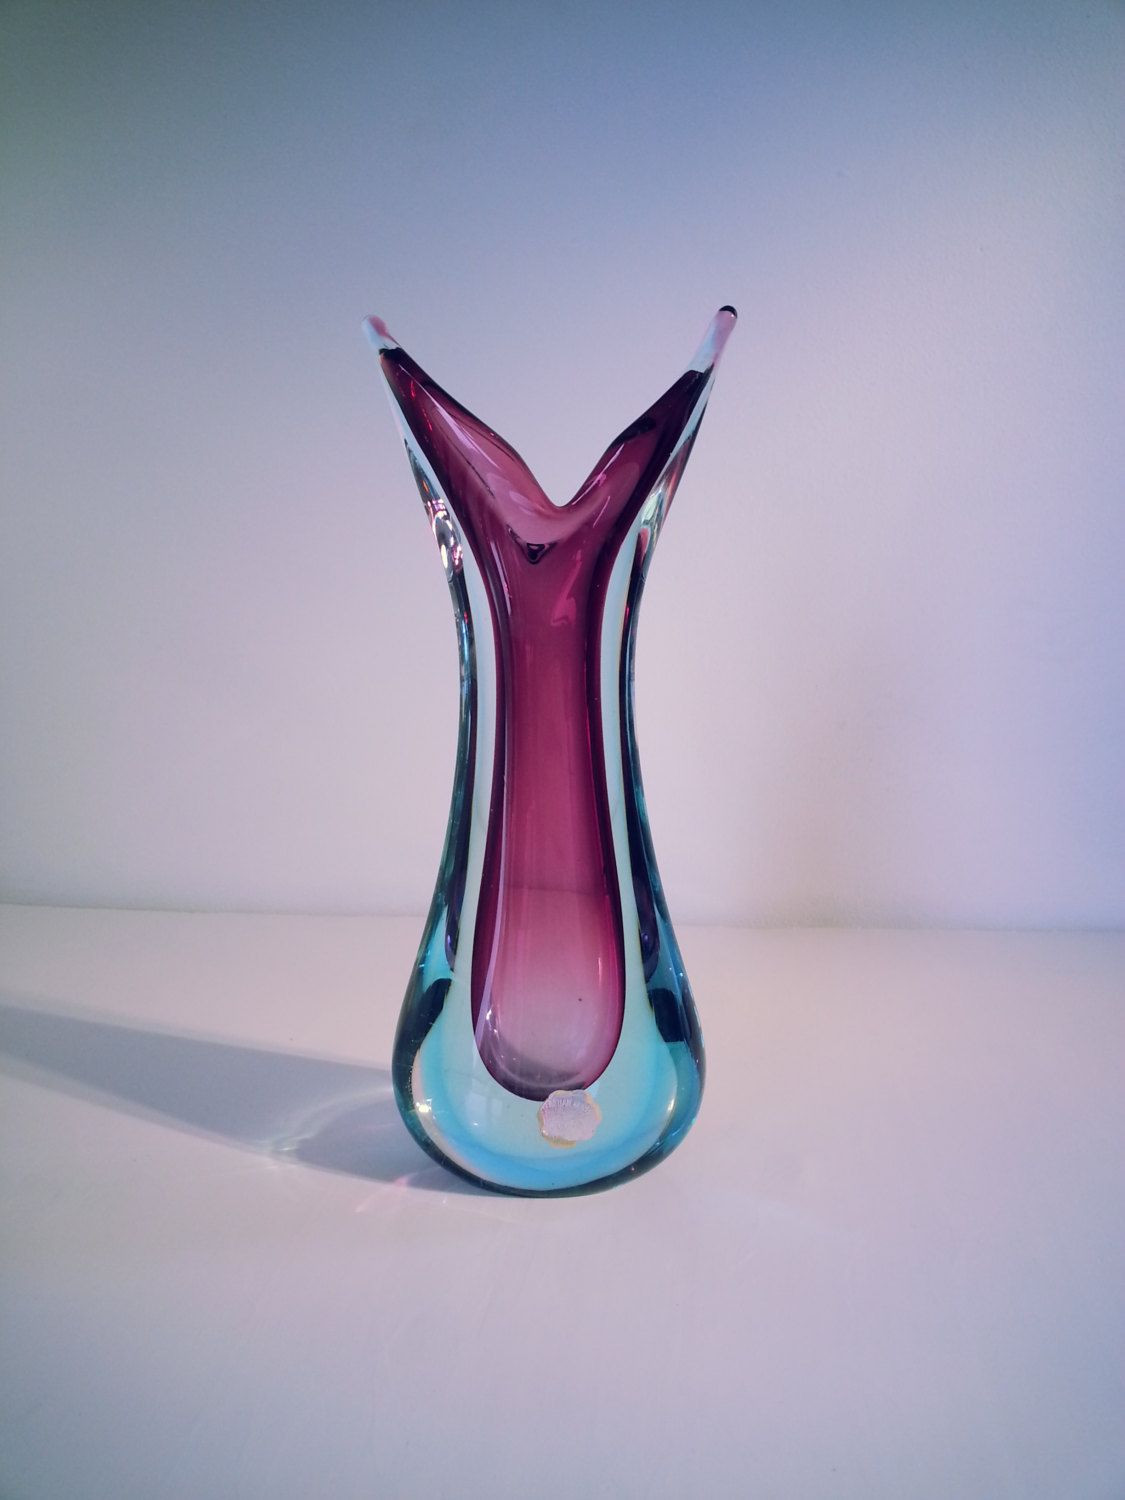 13 Best Square Glass Vases for Sale 2024 free download square glass vases for sale of murano sommerso genuine venetian glass 1950s 1960s purple blue intended for murano sommerso genuine venetian glass 1950s 1960s purple blue glass vase pulled de